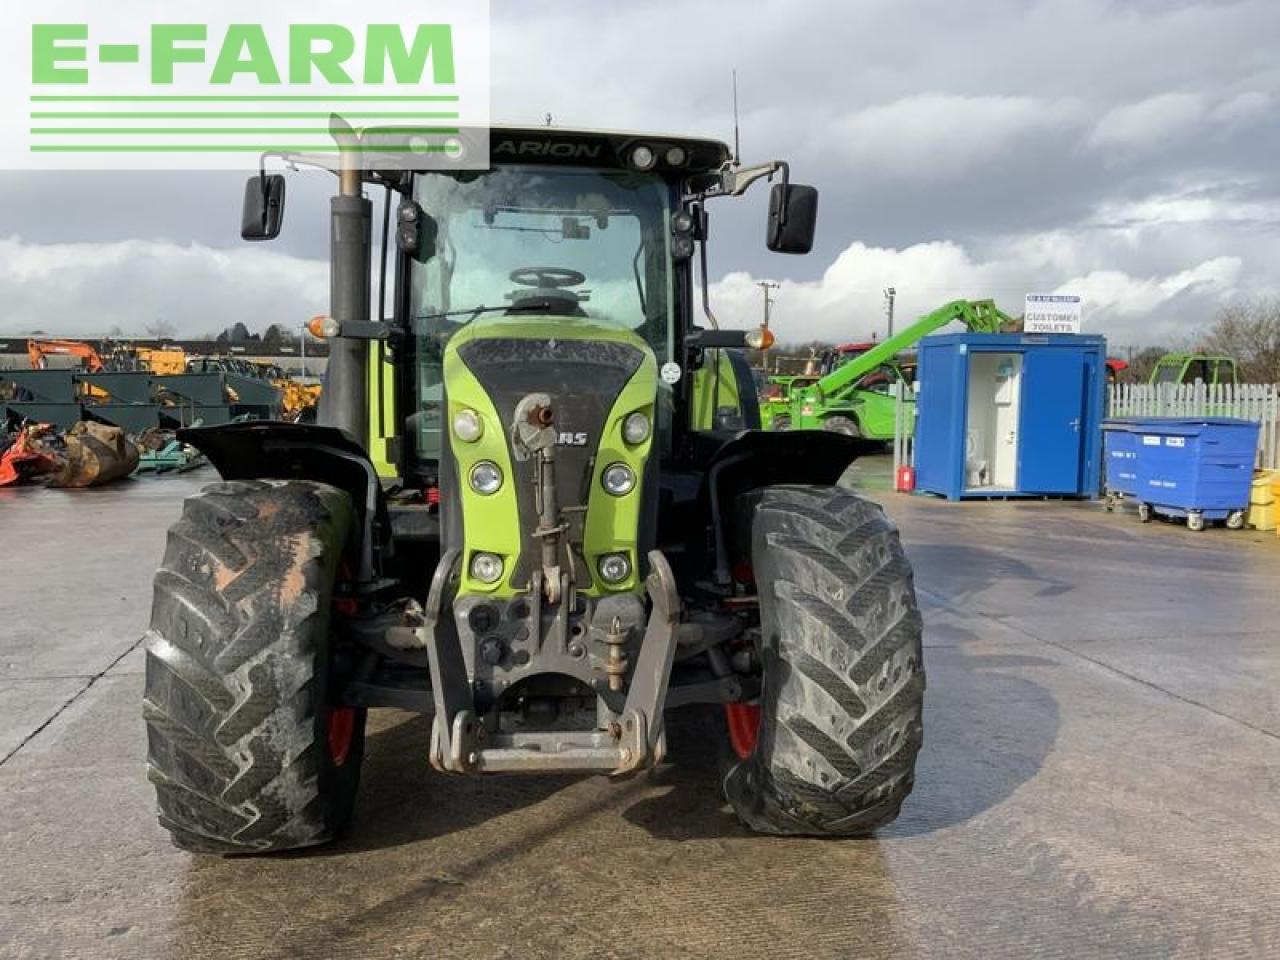 Farm tractor CLAAS 650 arion tractor (st15805)